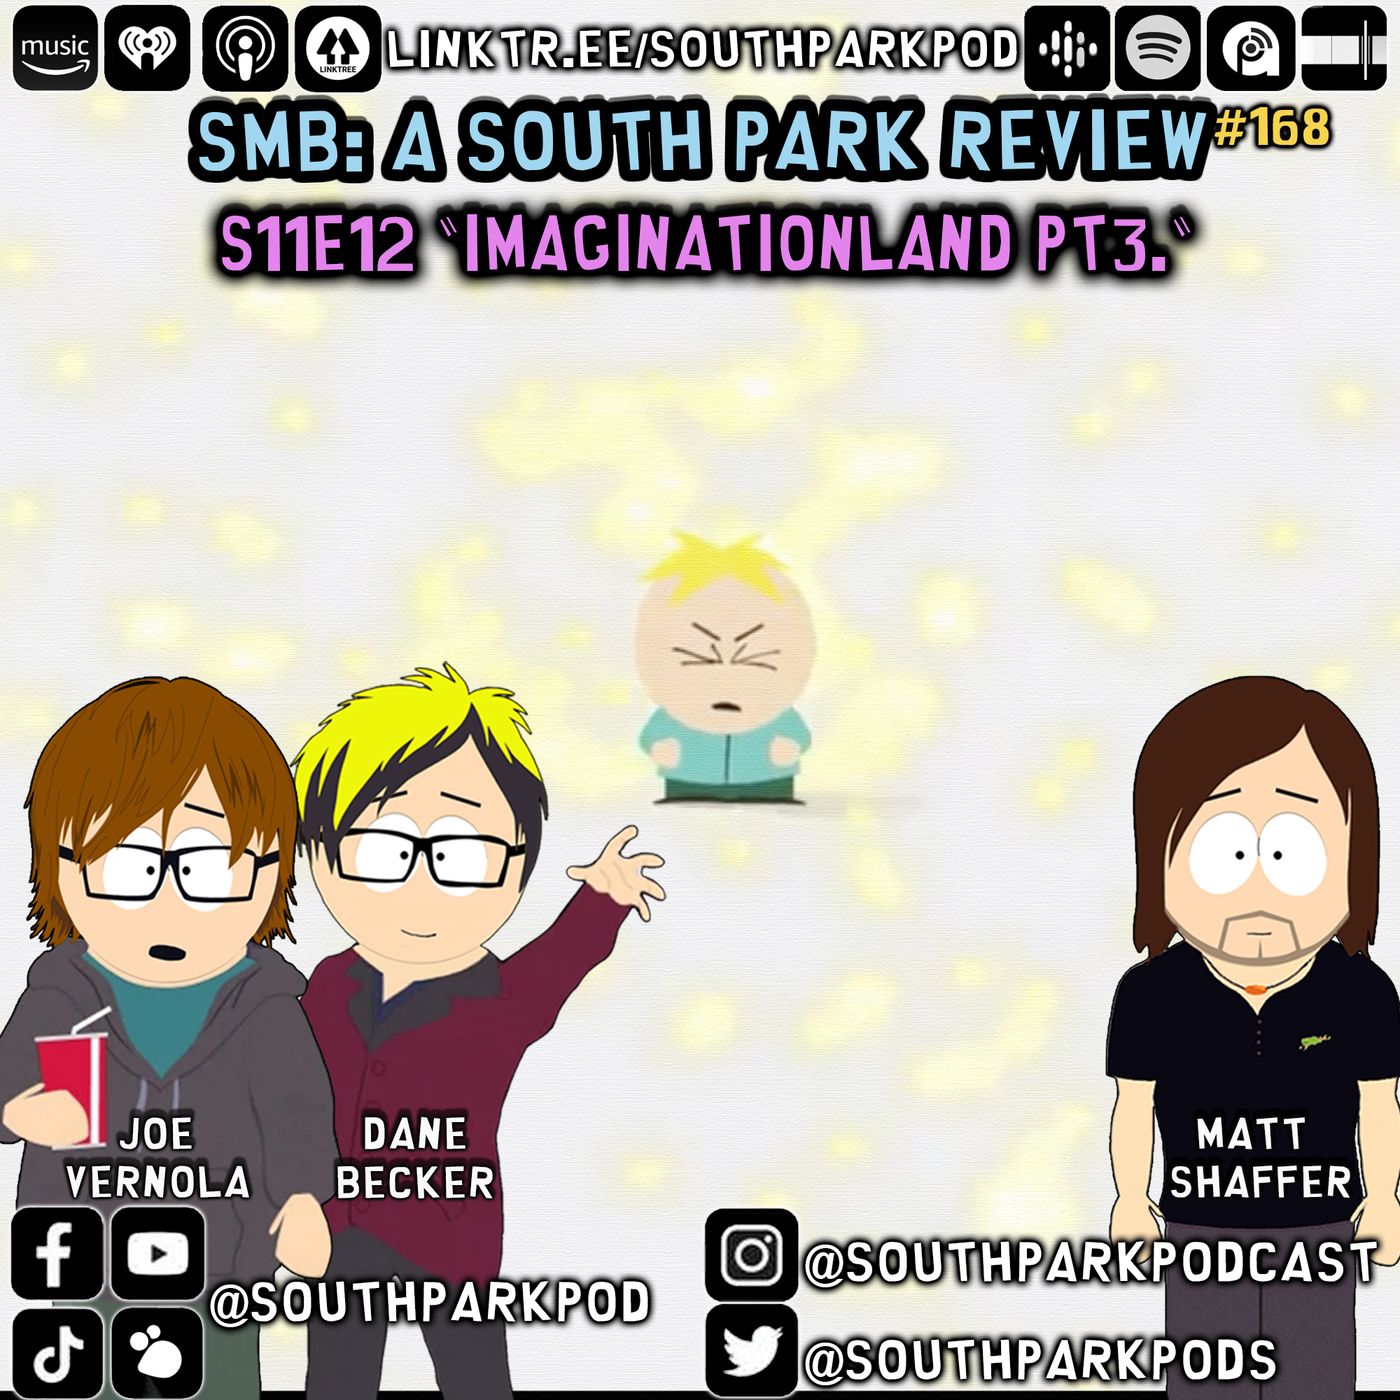 SMB #168 - S11 E12 Imagination Land Pt 3. - ”BELIEVE IN SANTA RIGHT NOW!!!’